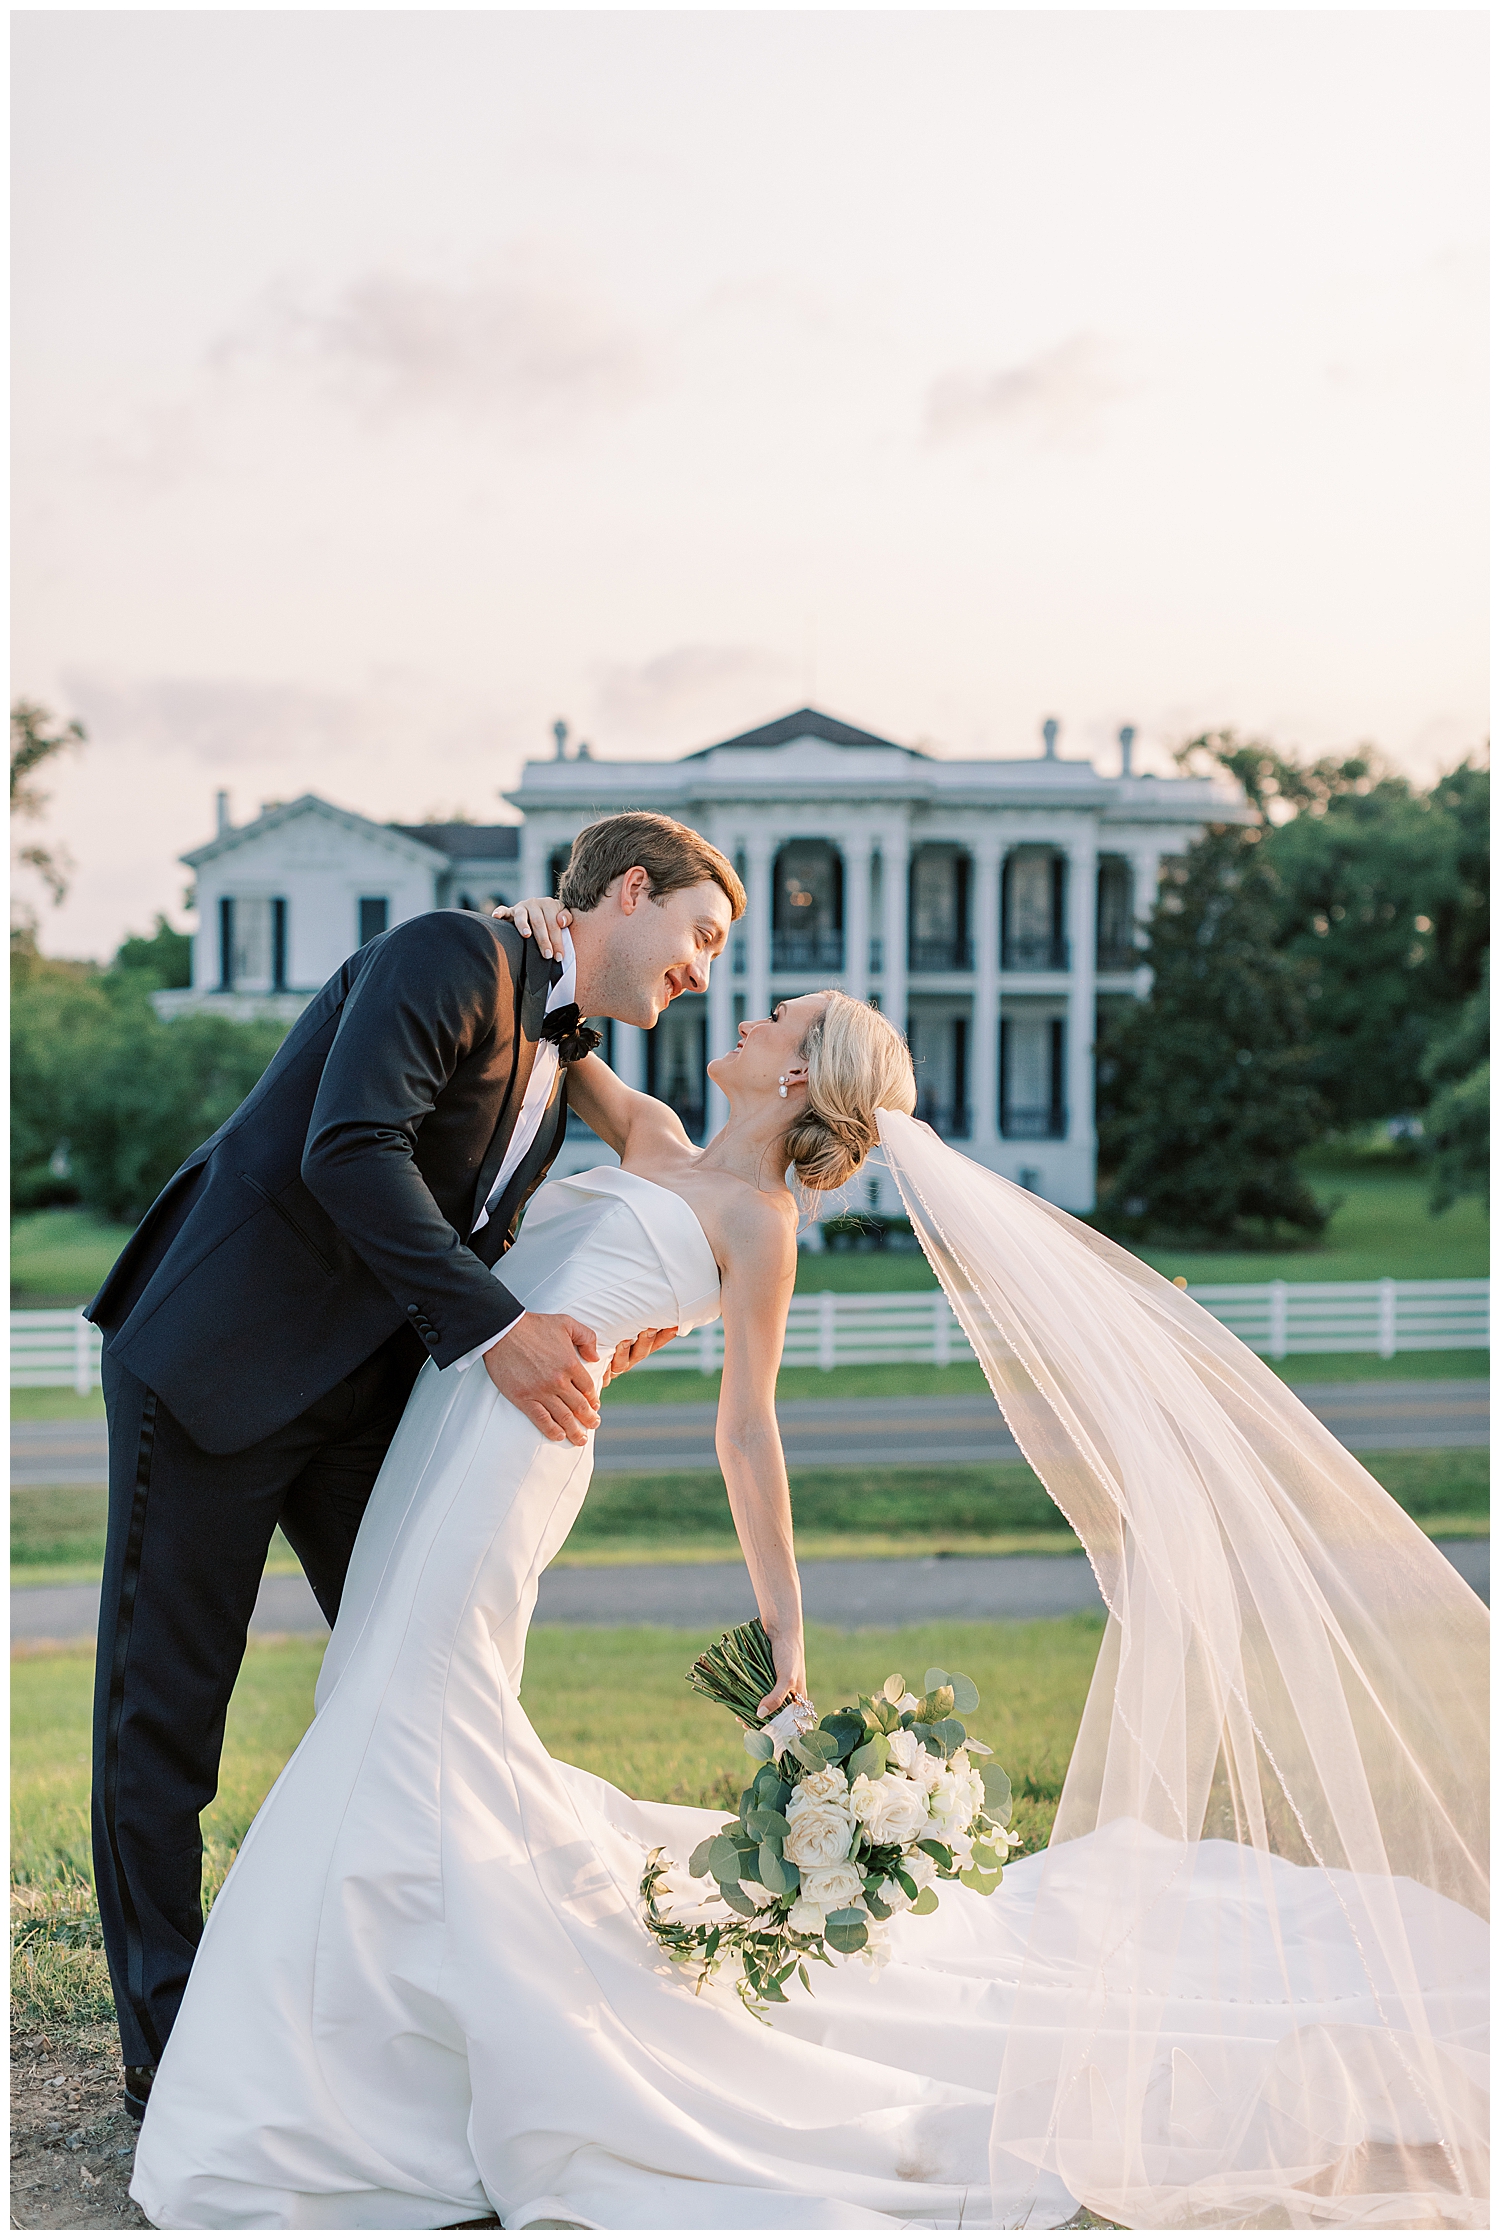 A husband and wife embrace each other while standing before Nottoway Plantation at sunset.